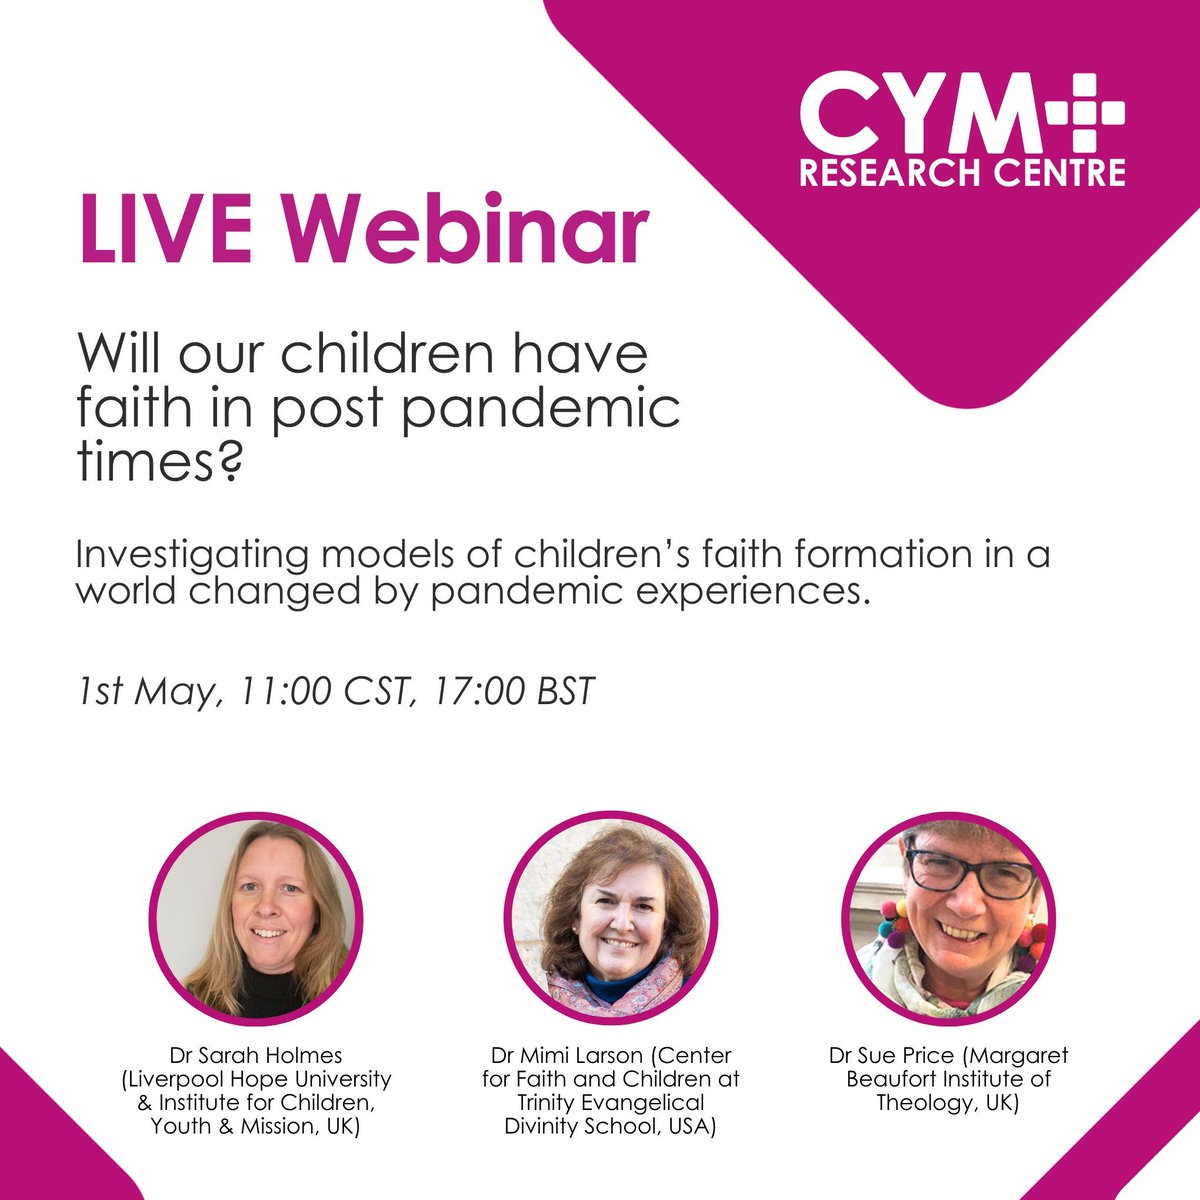 LIVE webinar - 'Will our children have faith in post pandemic times?' We'll be investigating models of children’s faith formation in a world changed by pandemic experiences on Wednesday 1st May, 11:00 CST, 17:00 BST It's free and you can sign up through the link in the bio.